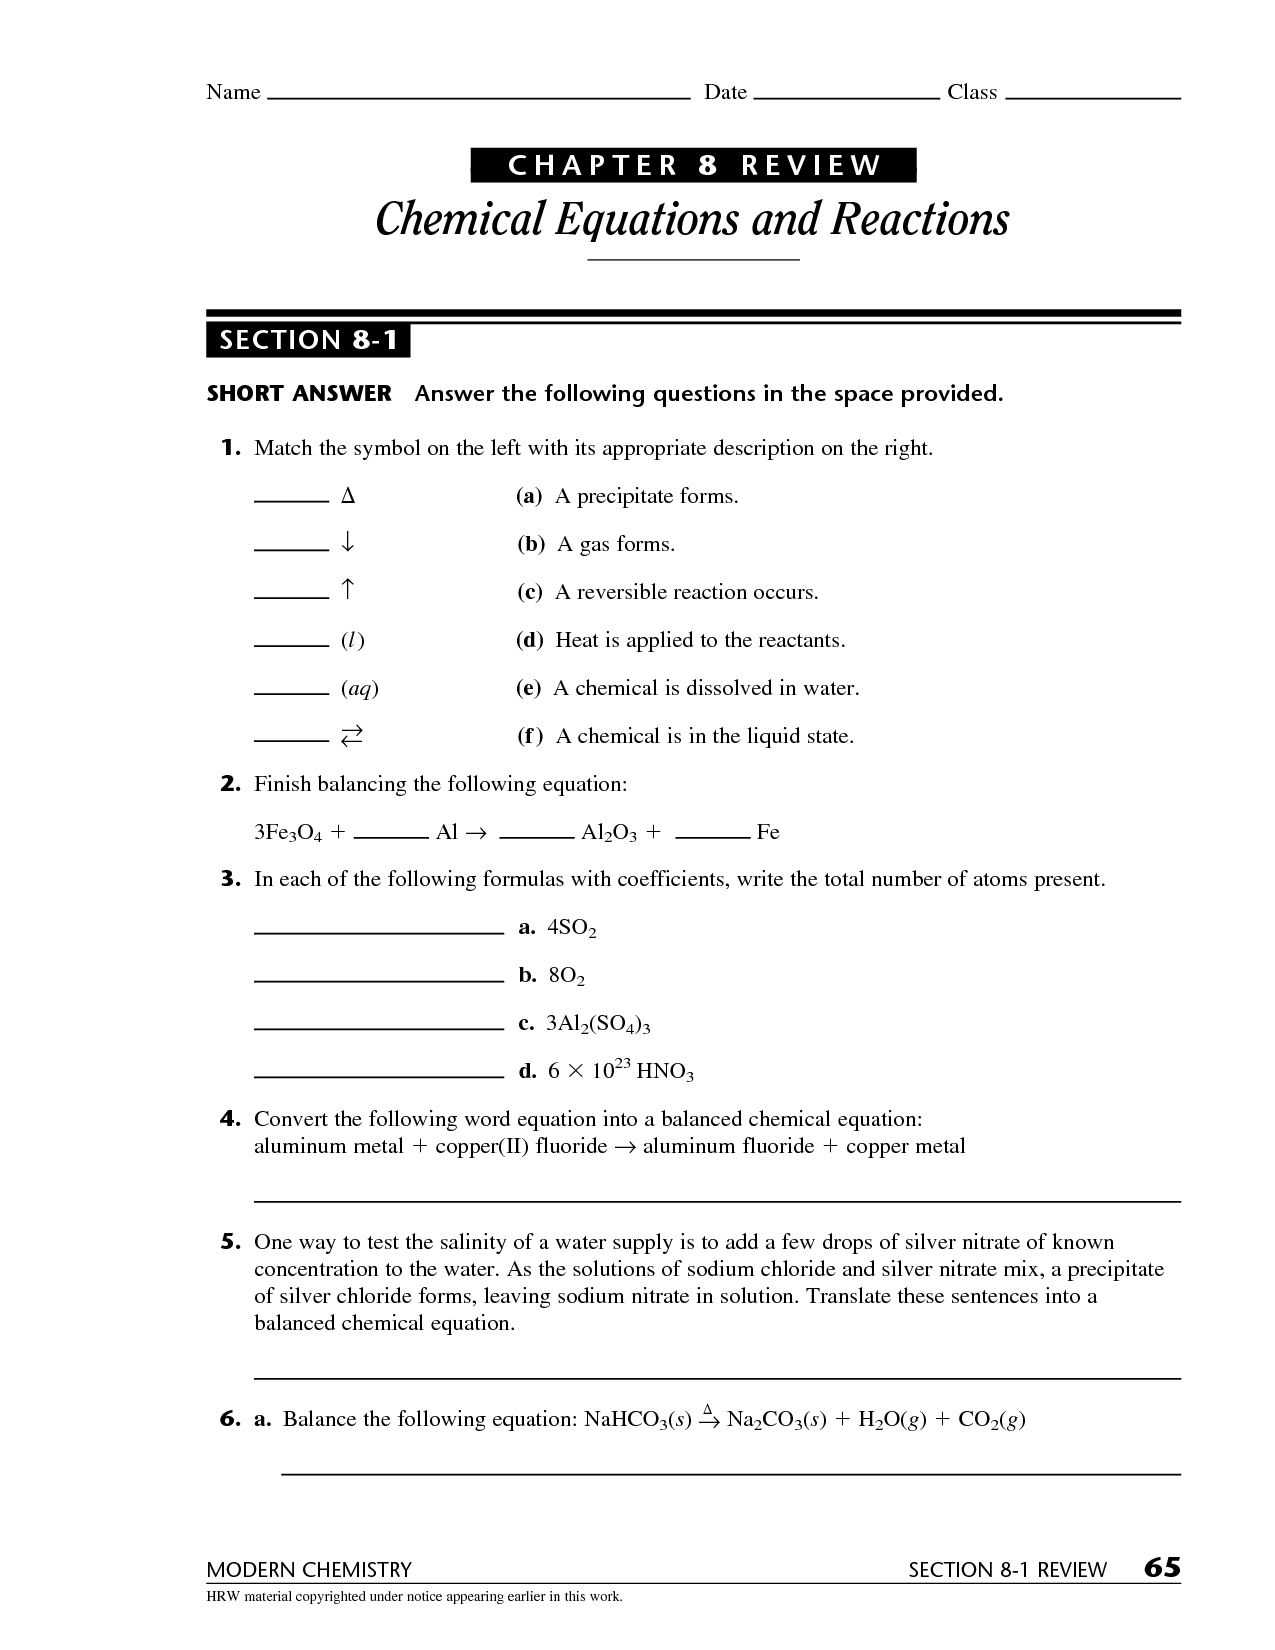 Modern Chemistry Answers Chapter 8 Review Image